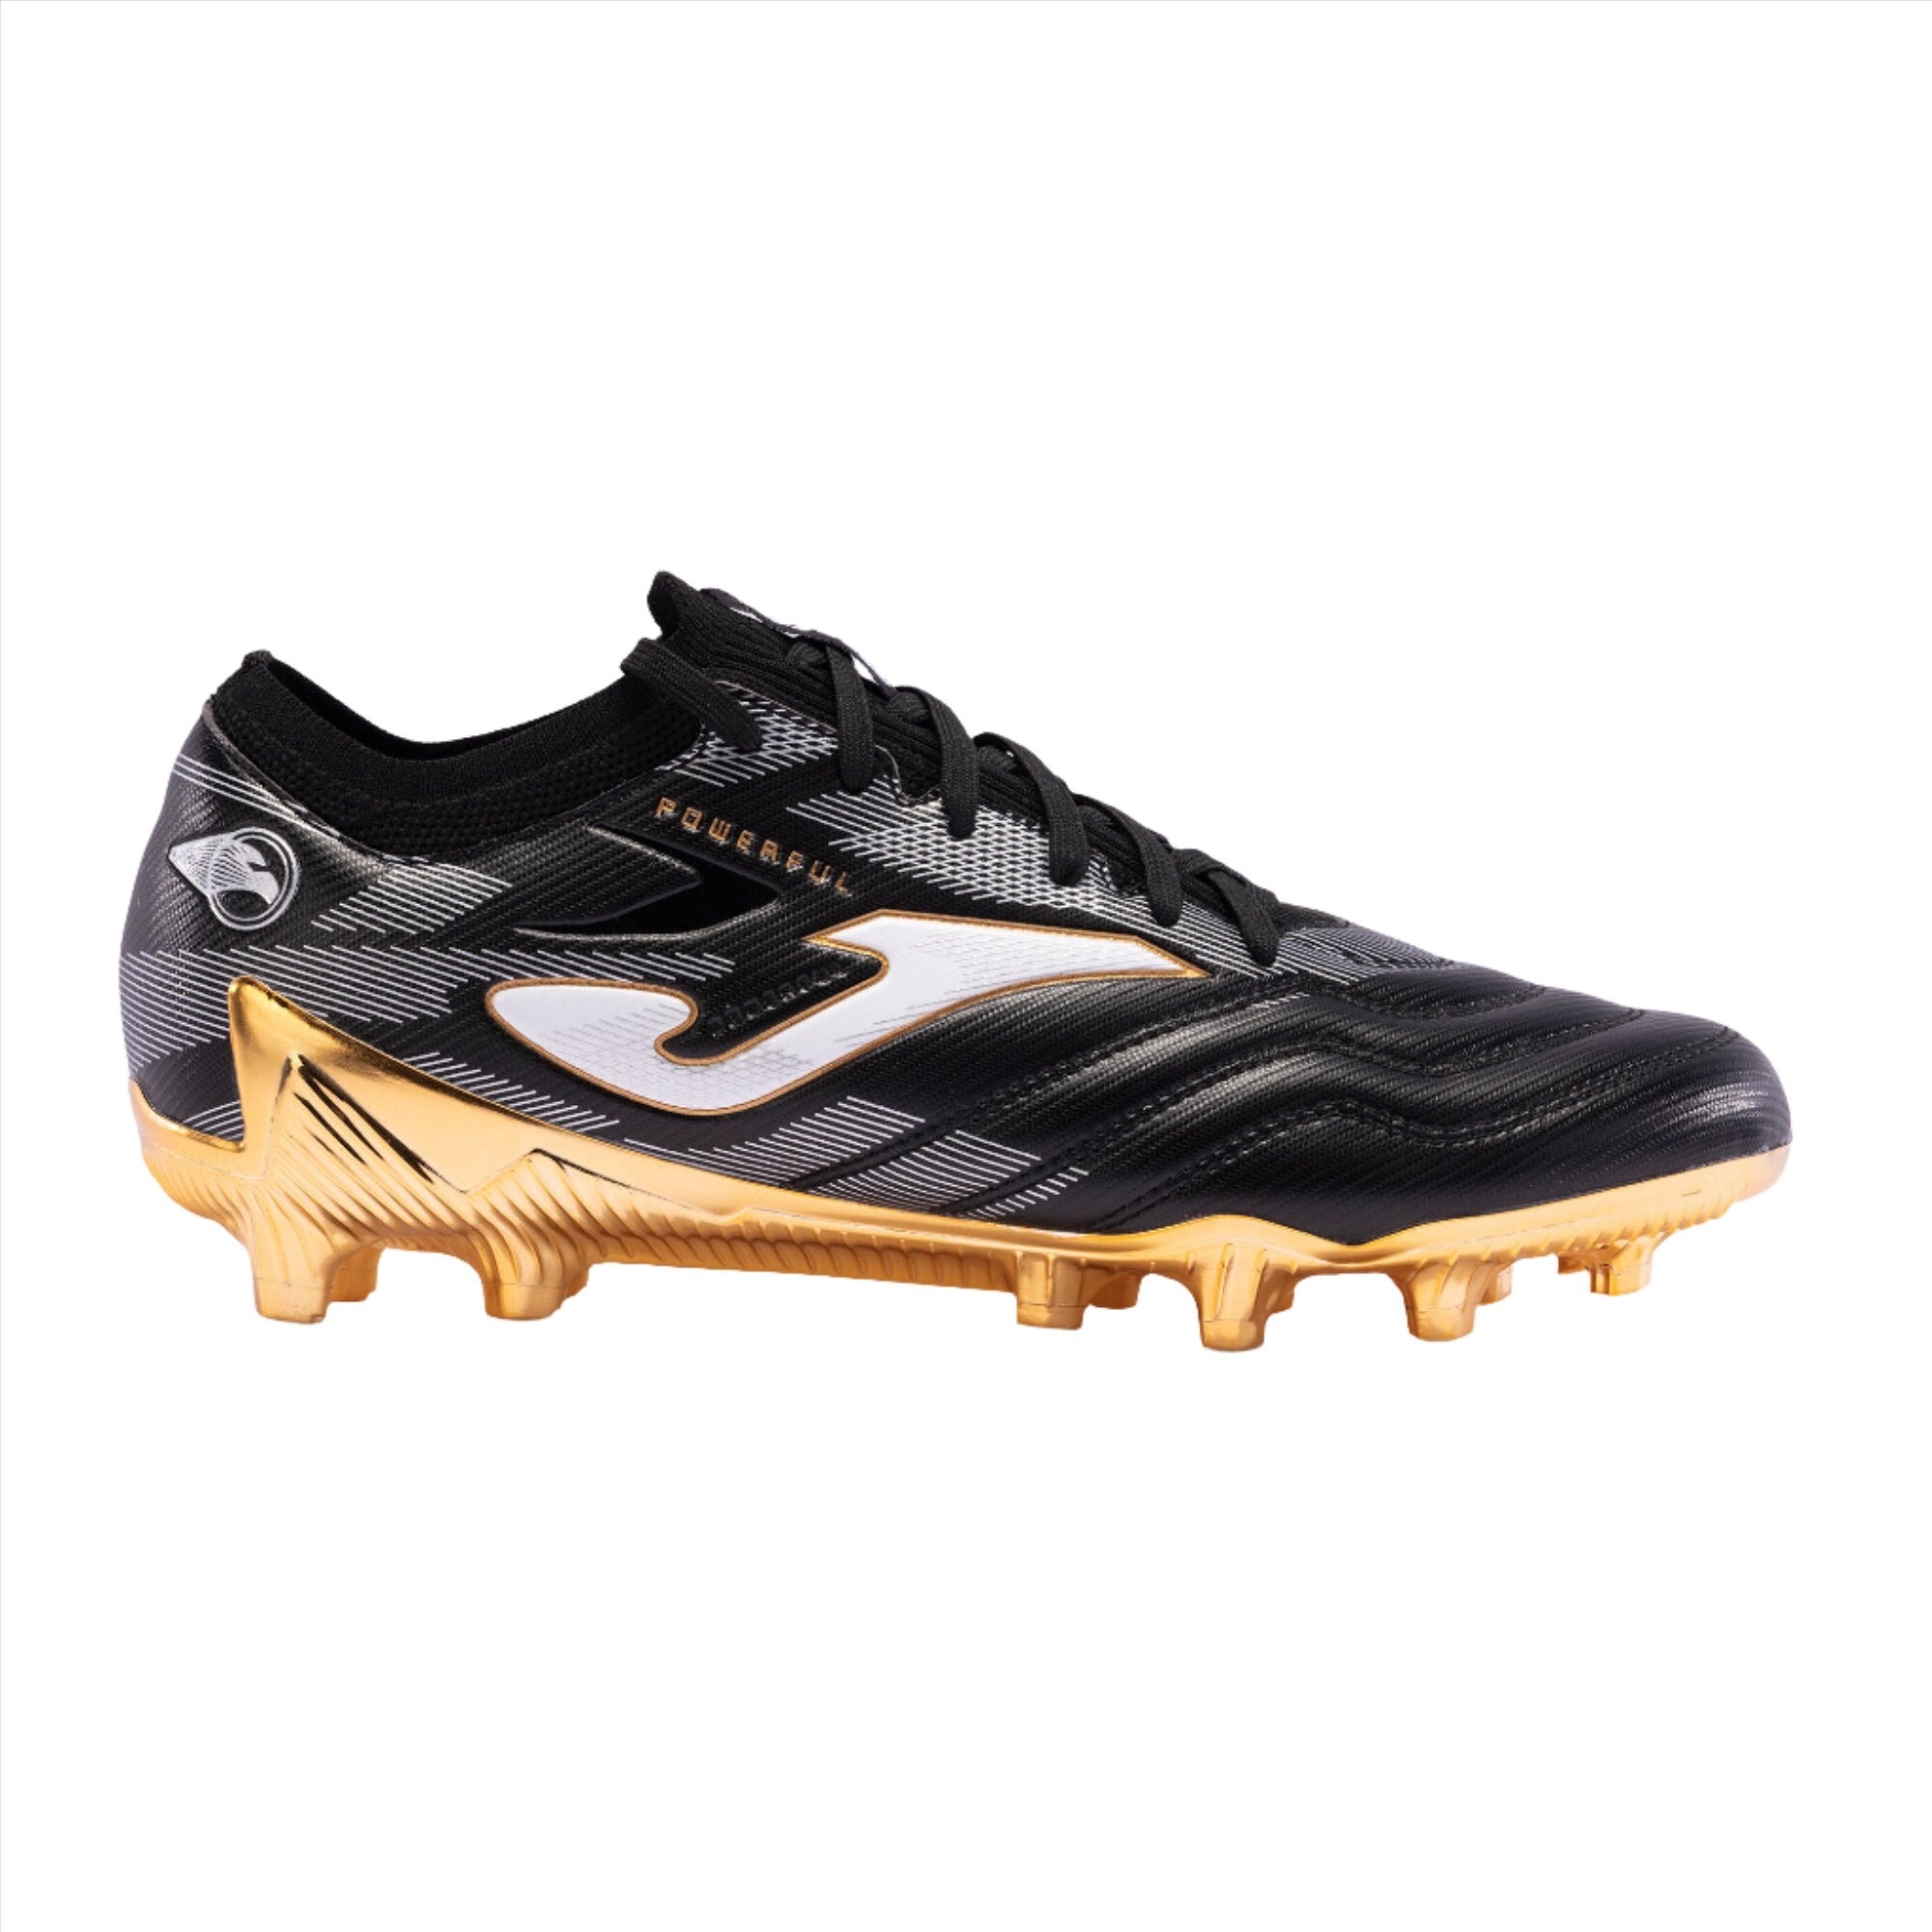 Joma Powerful Cup 24 FG - Black/Gold